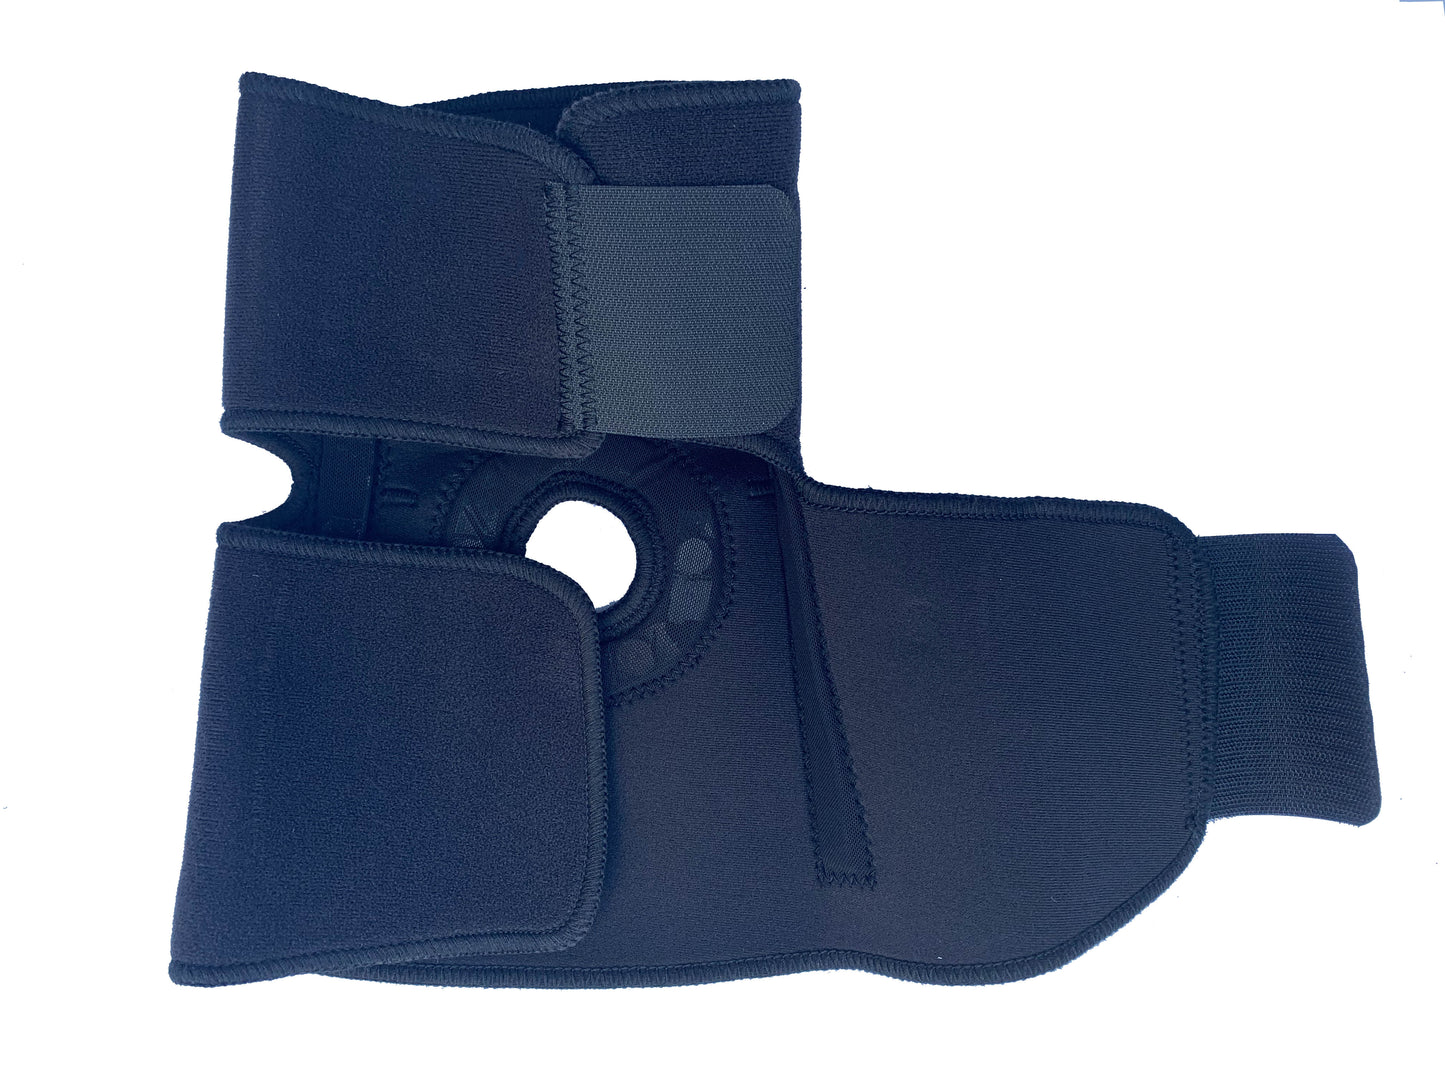 The inside of the Bio Magnetic Elbow Support showing the top half closed securely and the bottom half open showing some of the embedded magnets within the support. 